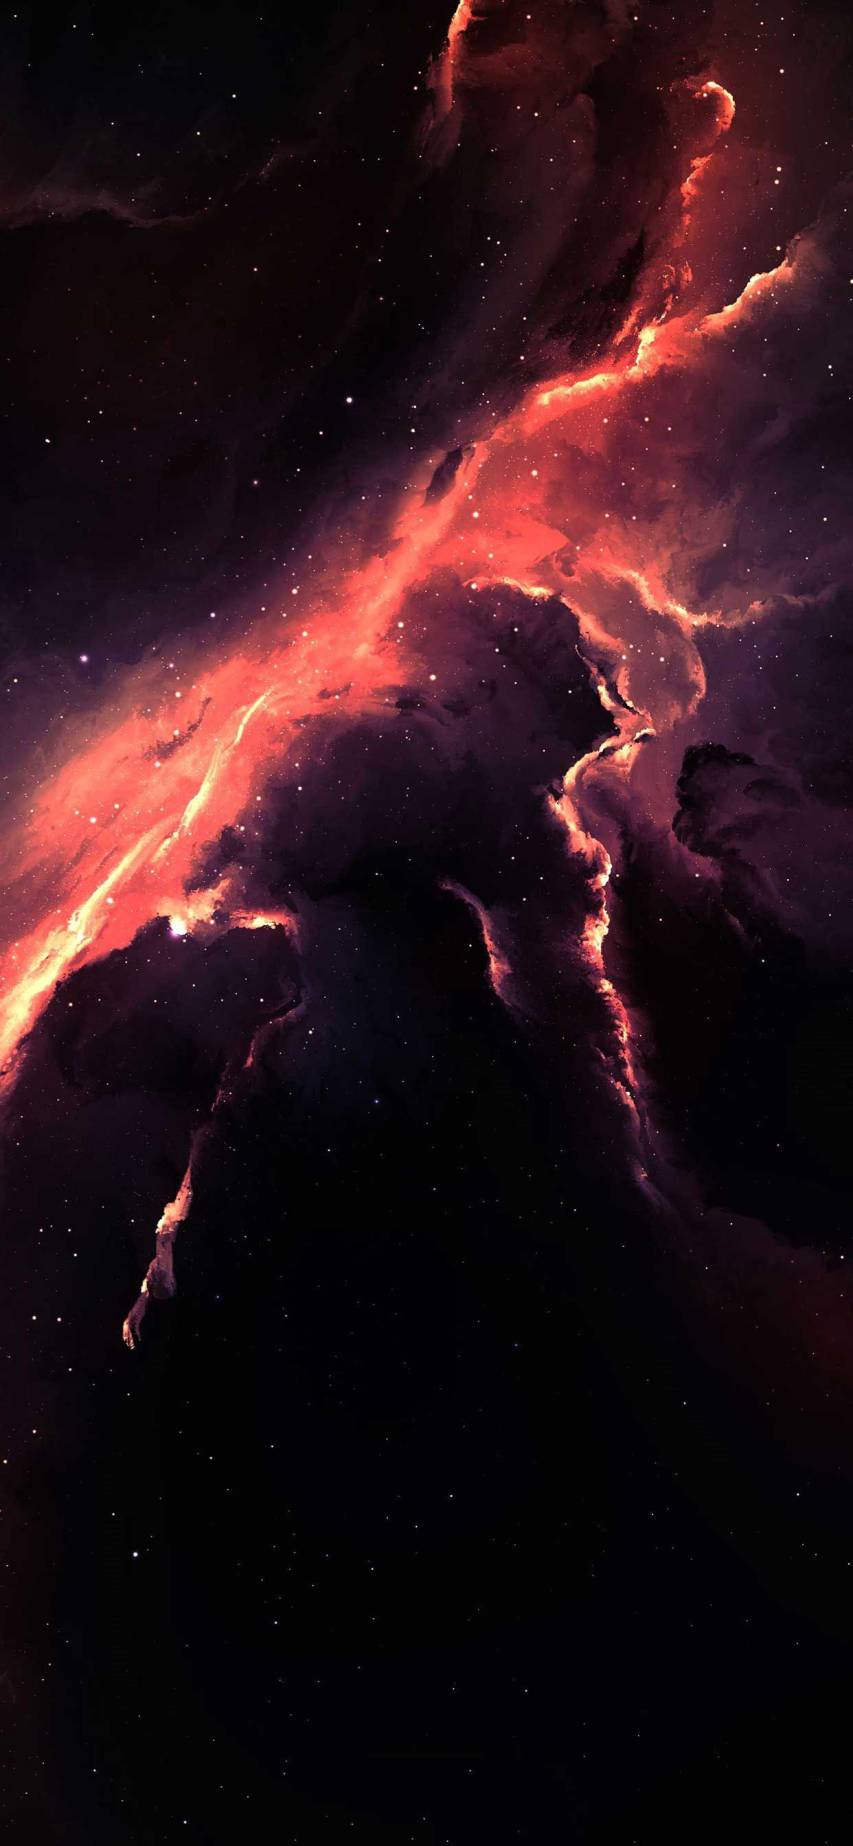 Nebula Landscape hd Wallpapers Pic for iPhone